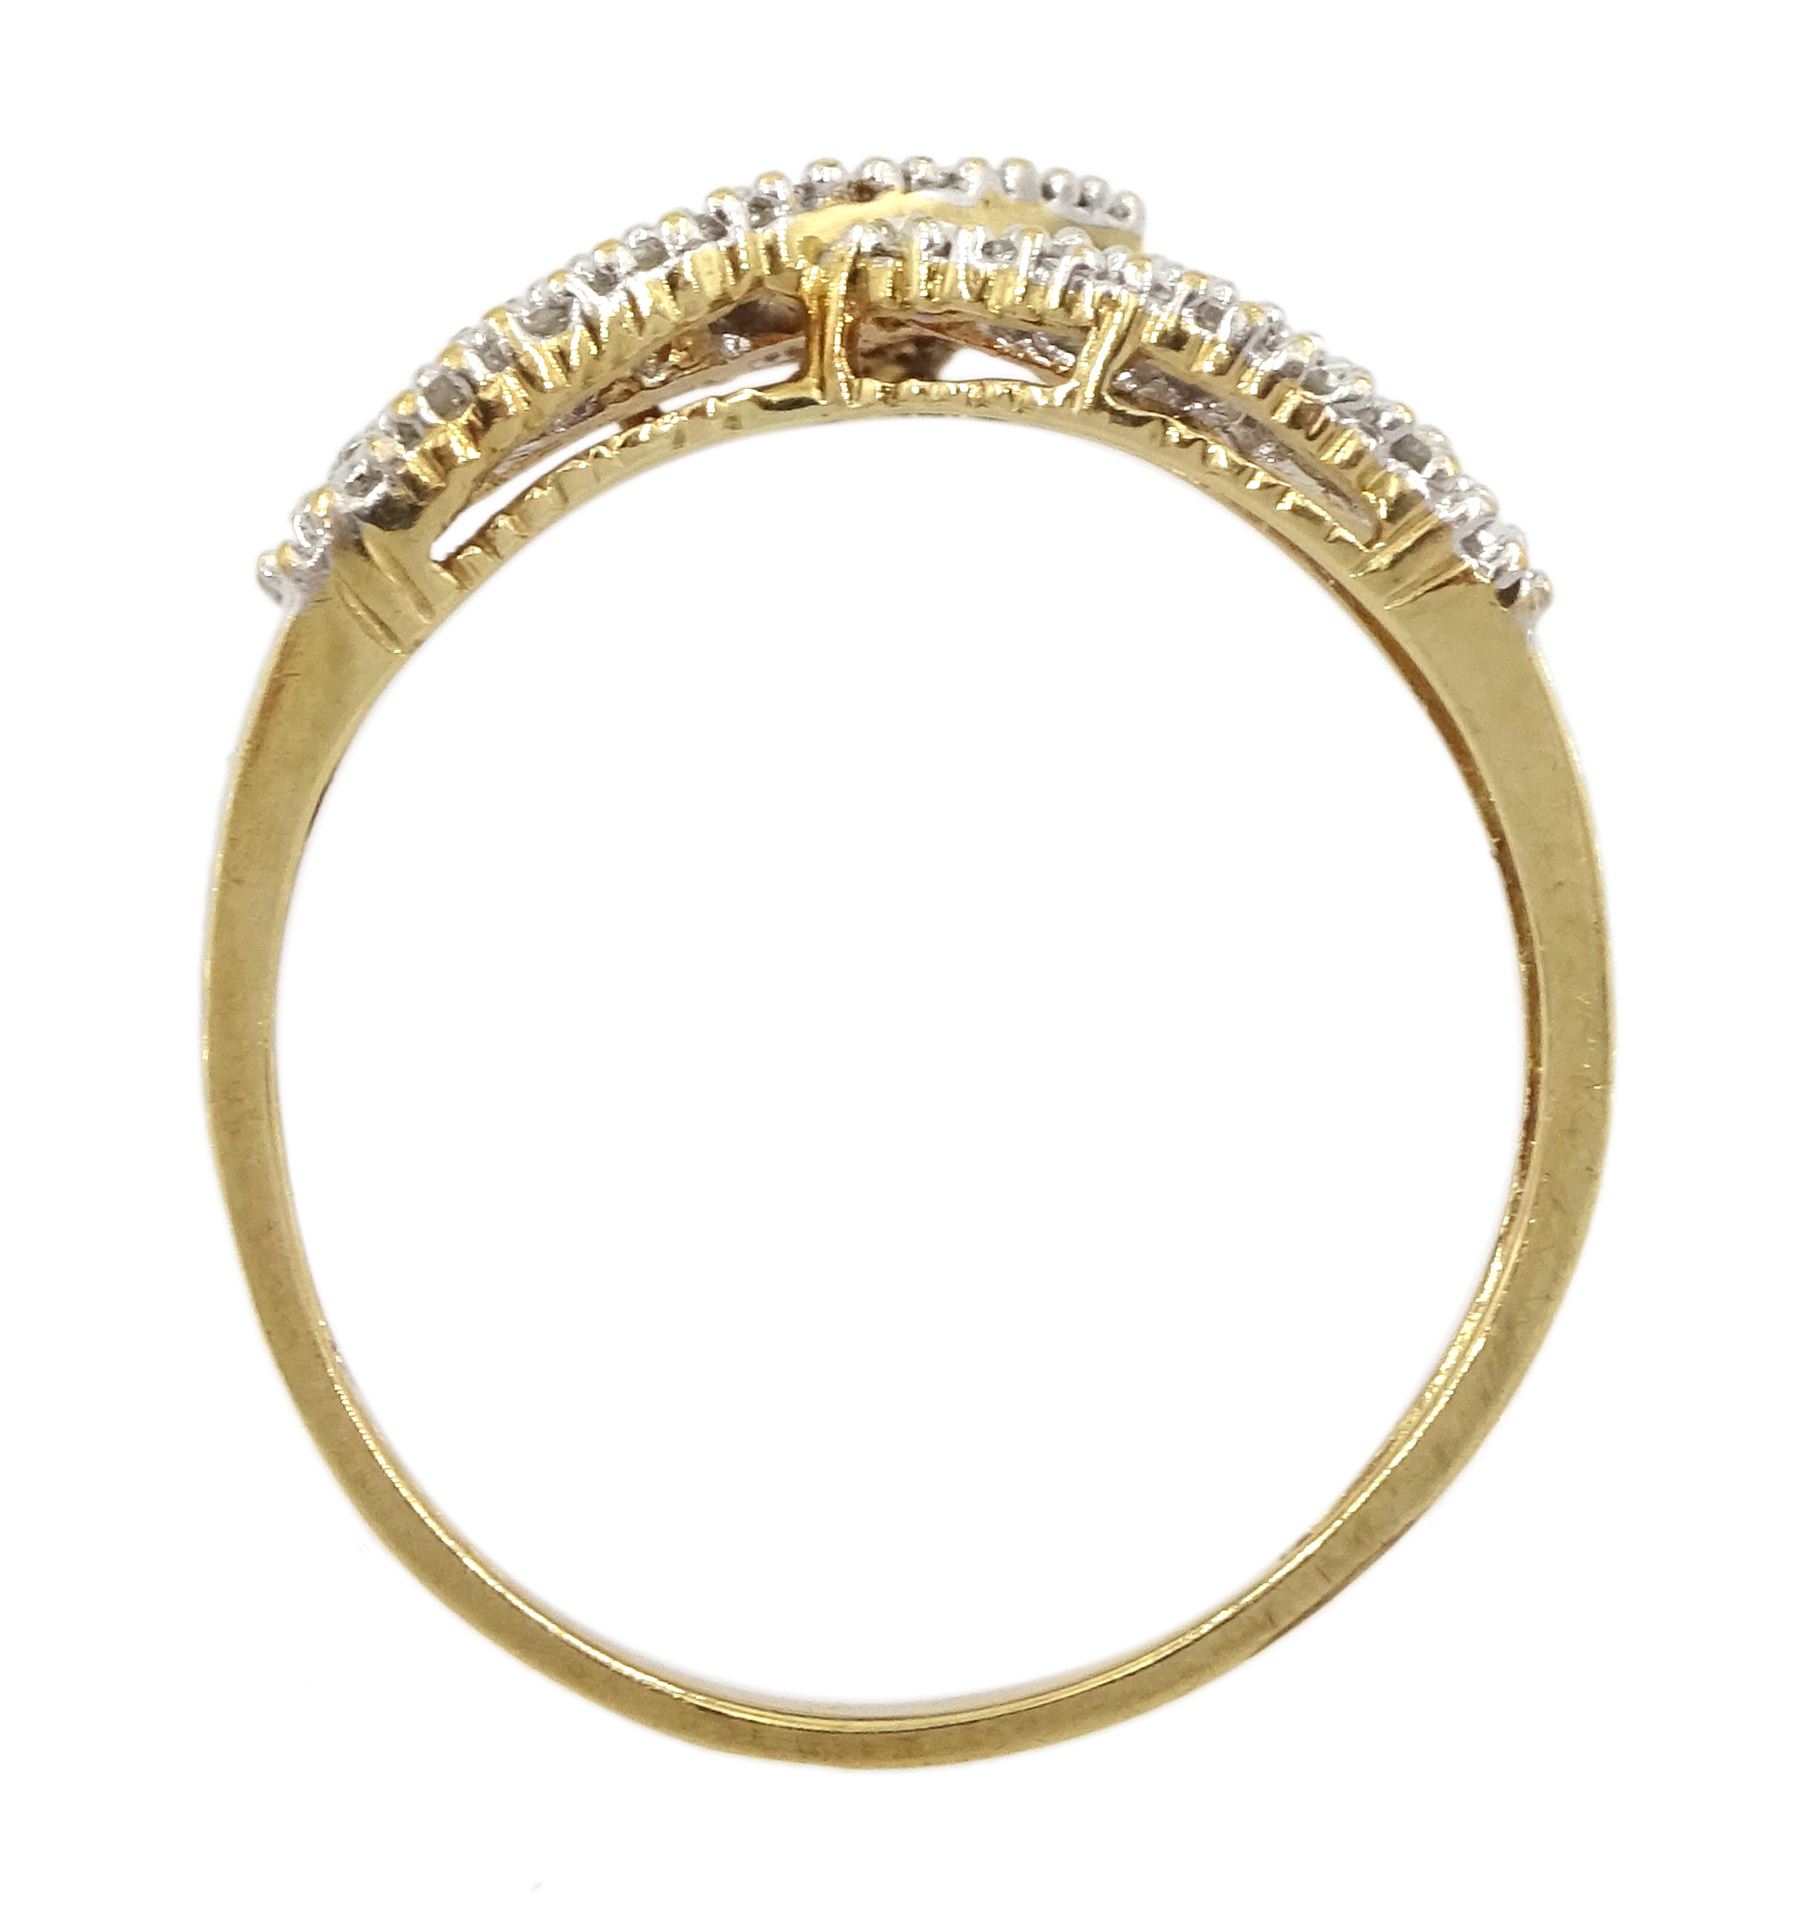 10ct gold baguette and round brilliant cut diamond wishbone ring - Image 4 of 4